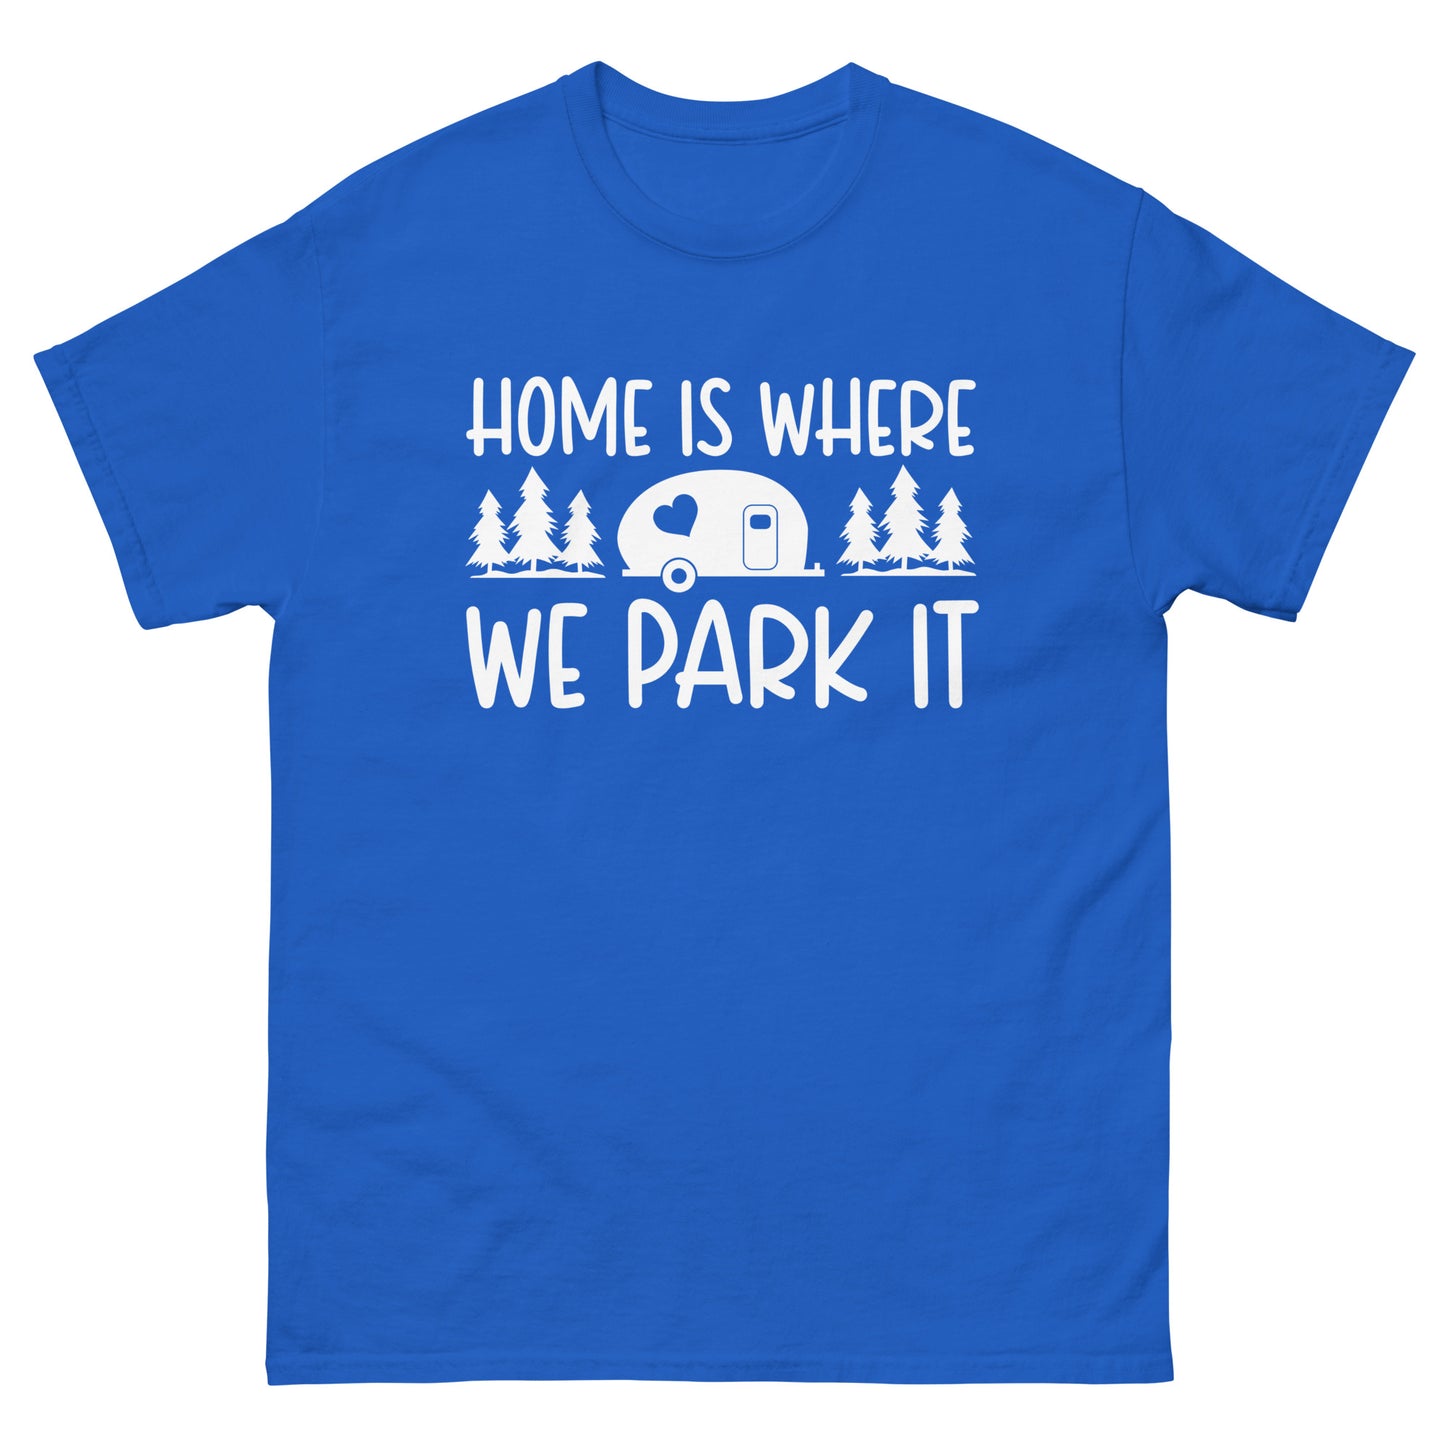 Home is where we park it classic tee